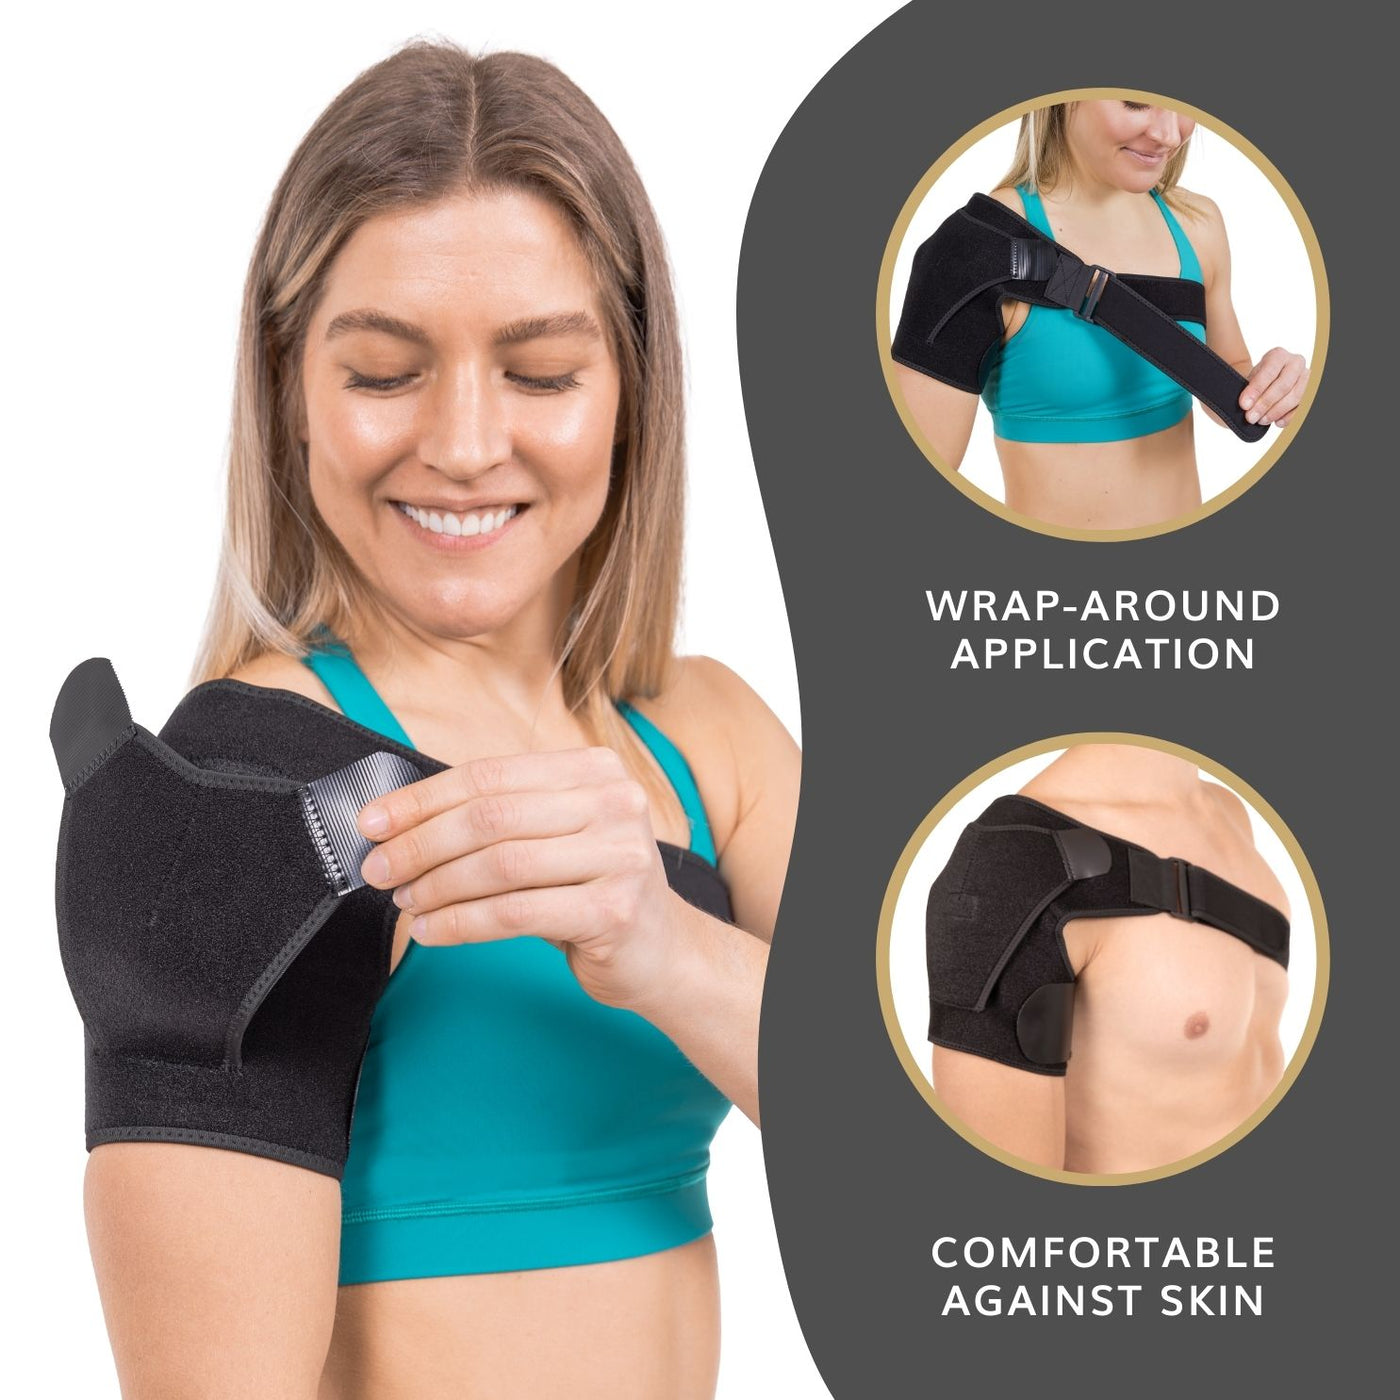 Rotator Cuff Pain Support & Shoulder Brace ~ Compression Sleeve